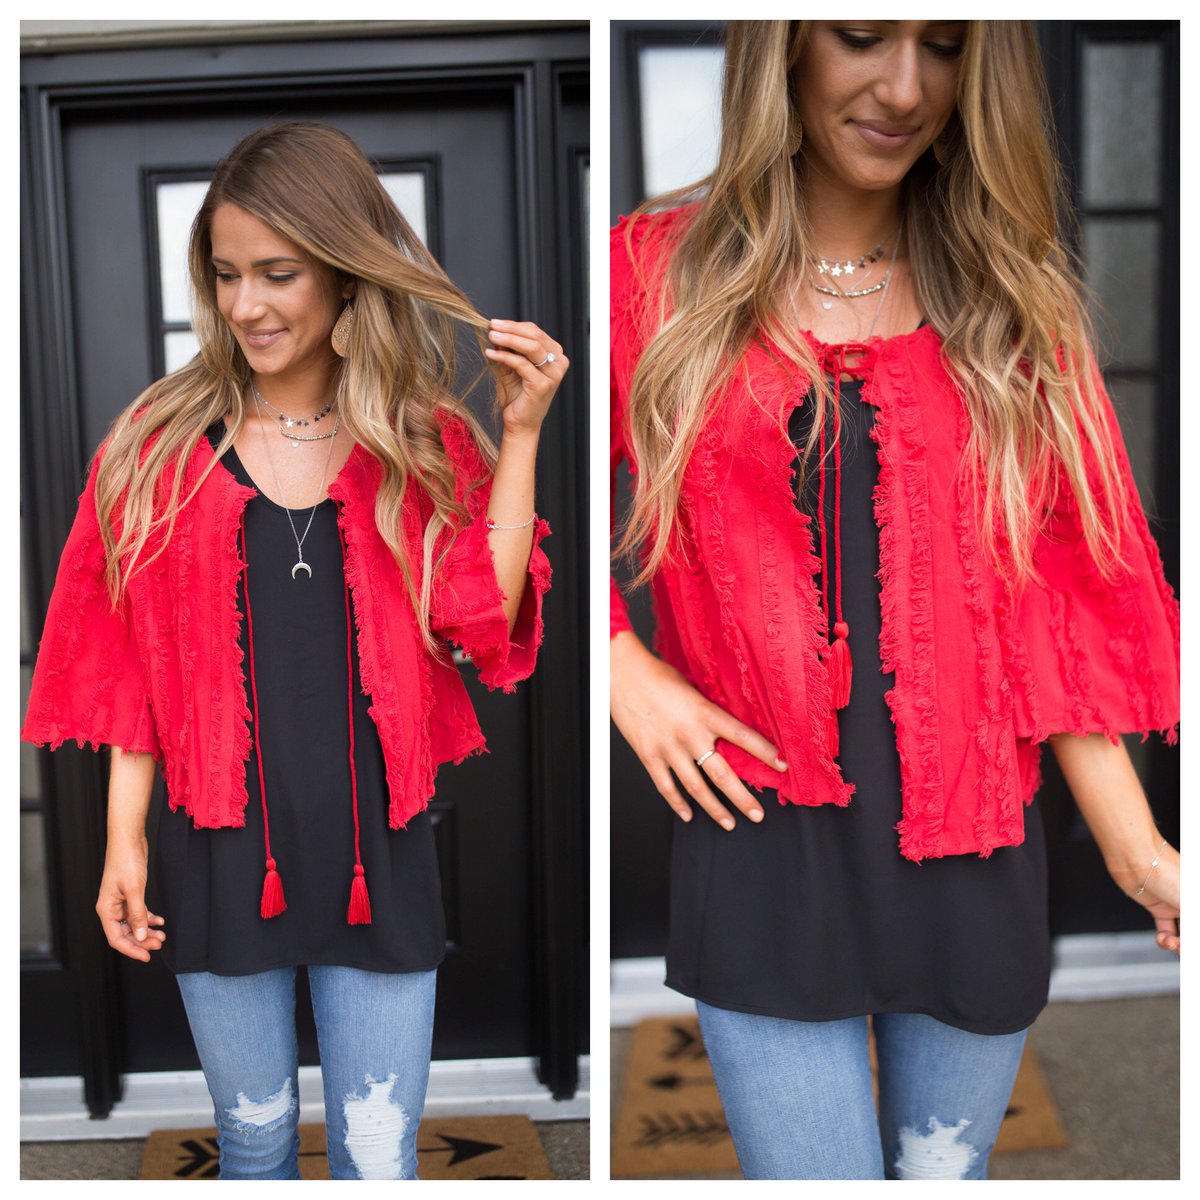 When you're looking for that unique, one of a kind piece. Loving this cape and it's versatility - dress it up - wear it with jeans, pair it with a basic dress. So many options! 
.
.
.
.
#ltkunder50 #indyboutiques #indystyle #fishersboutique #fishersindiana